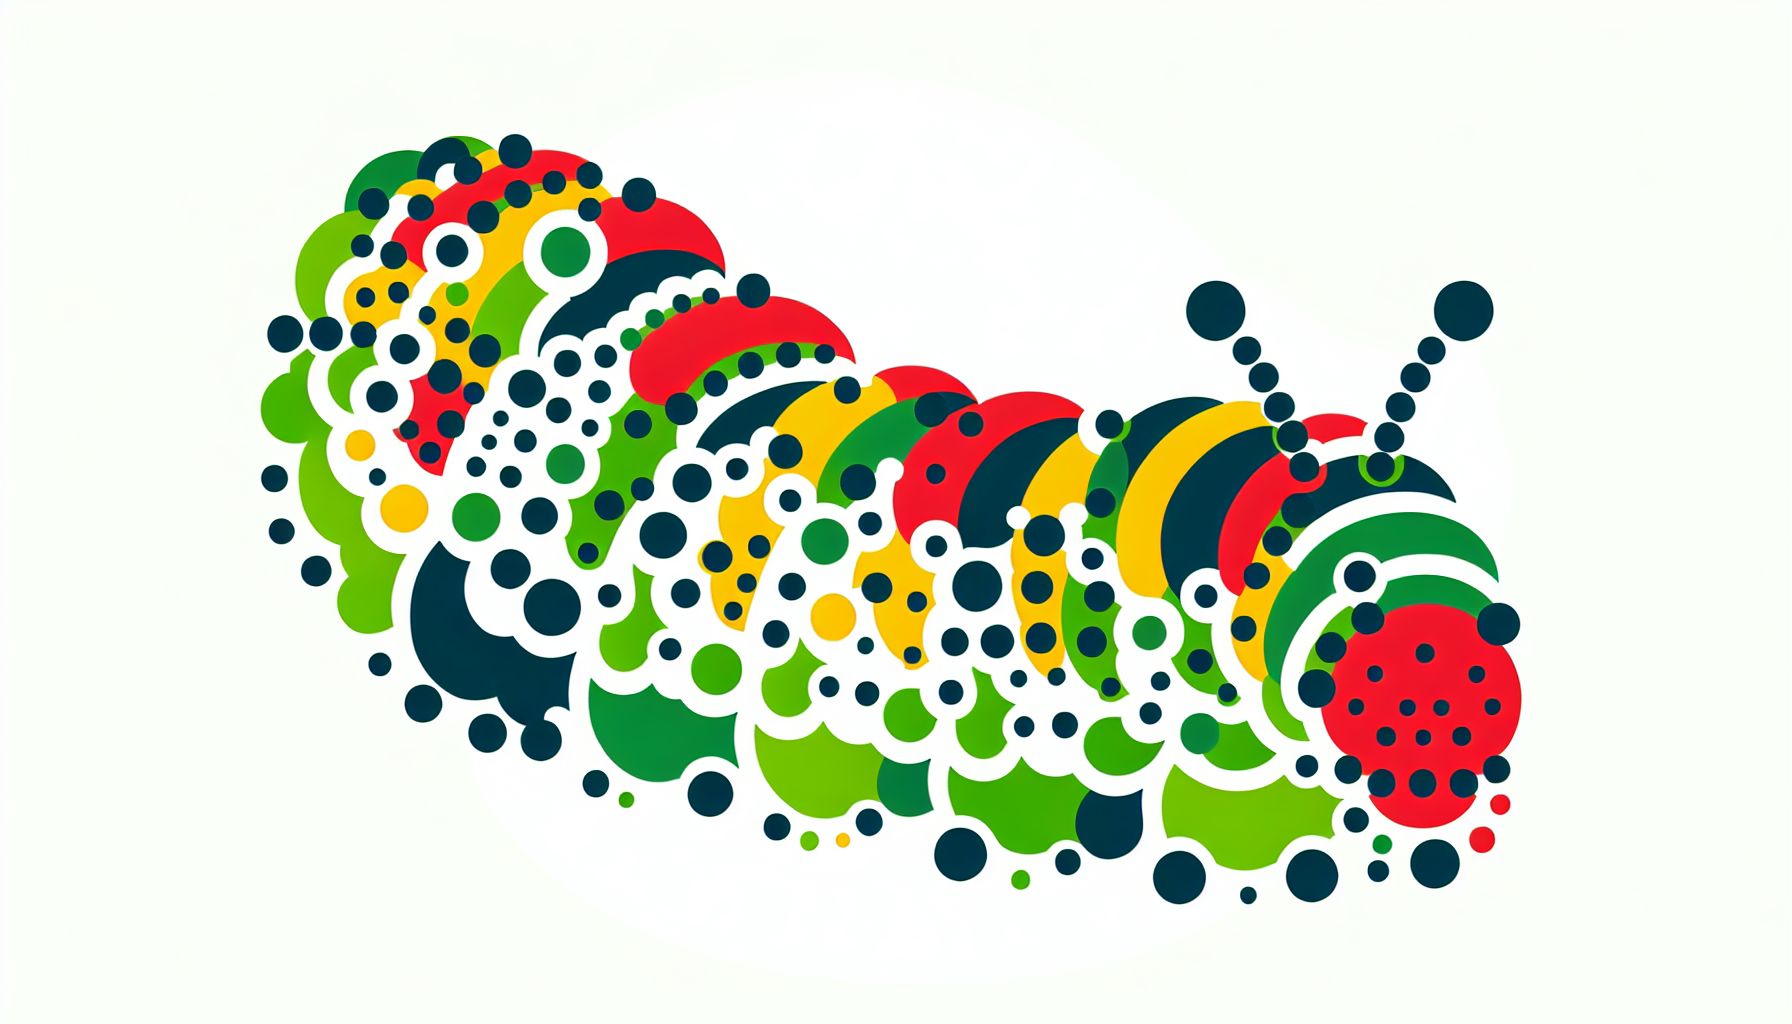 Caterpillar in flat illustration style and white background, red #f47574, green #88c7a8, yellow #fcc44b, and blue #645bc8 colors.